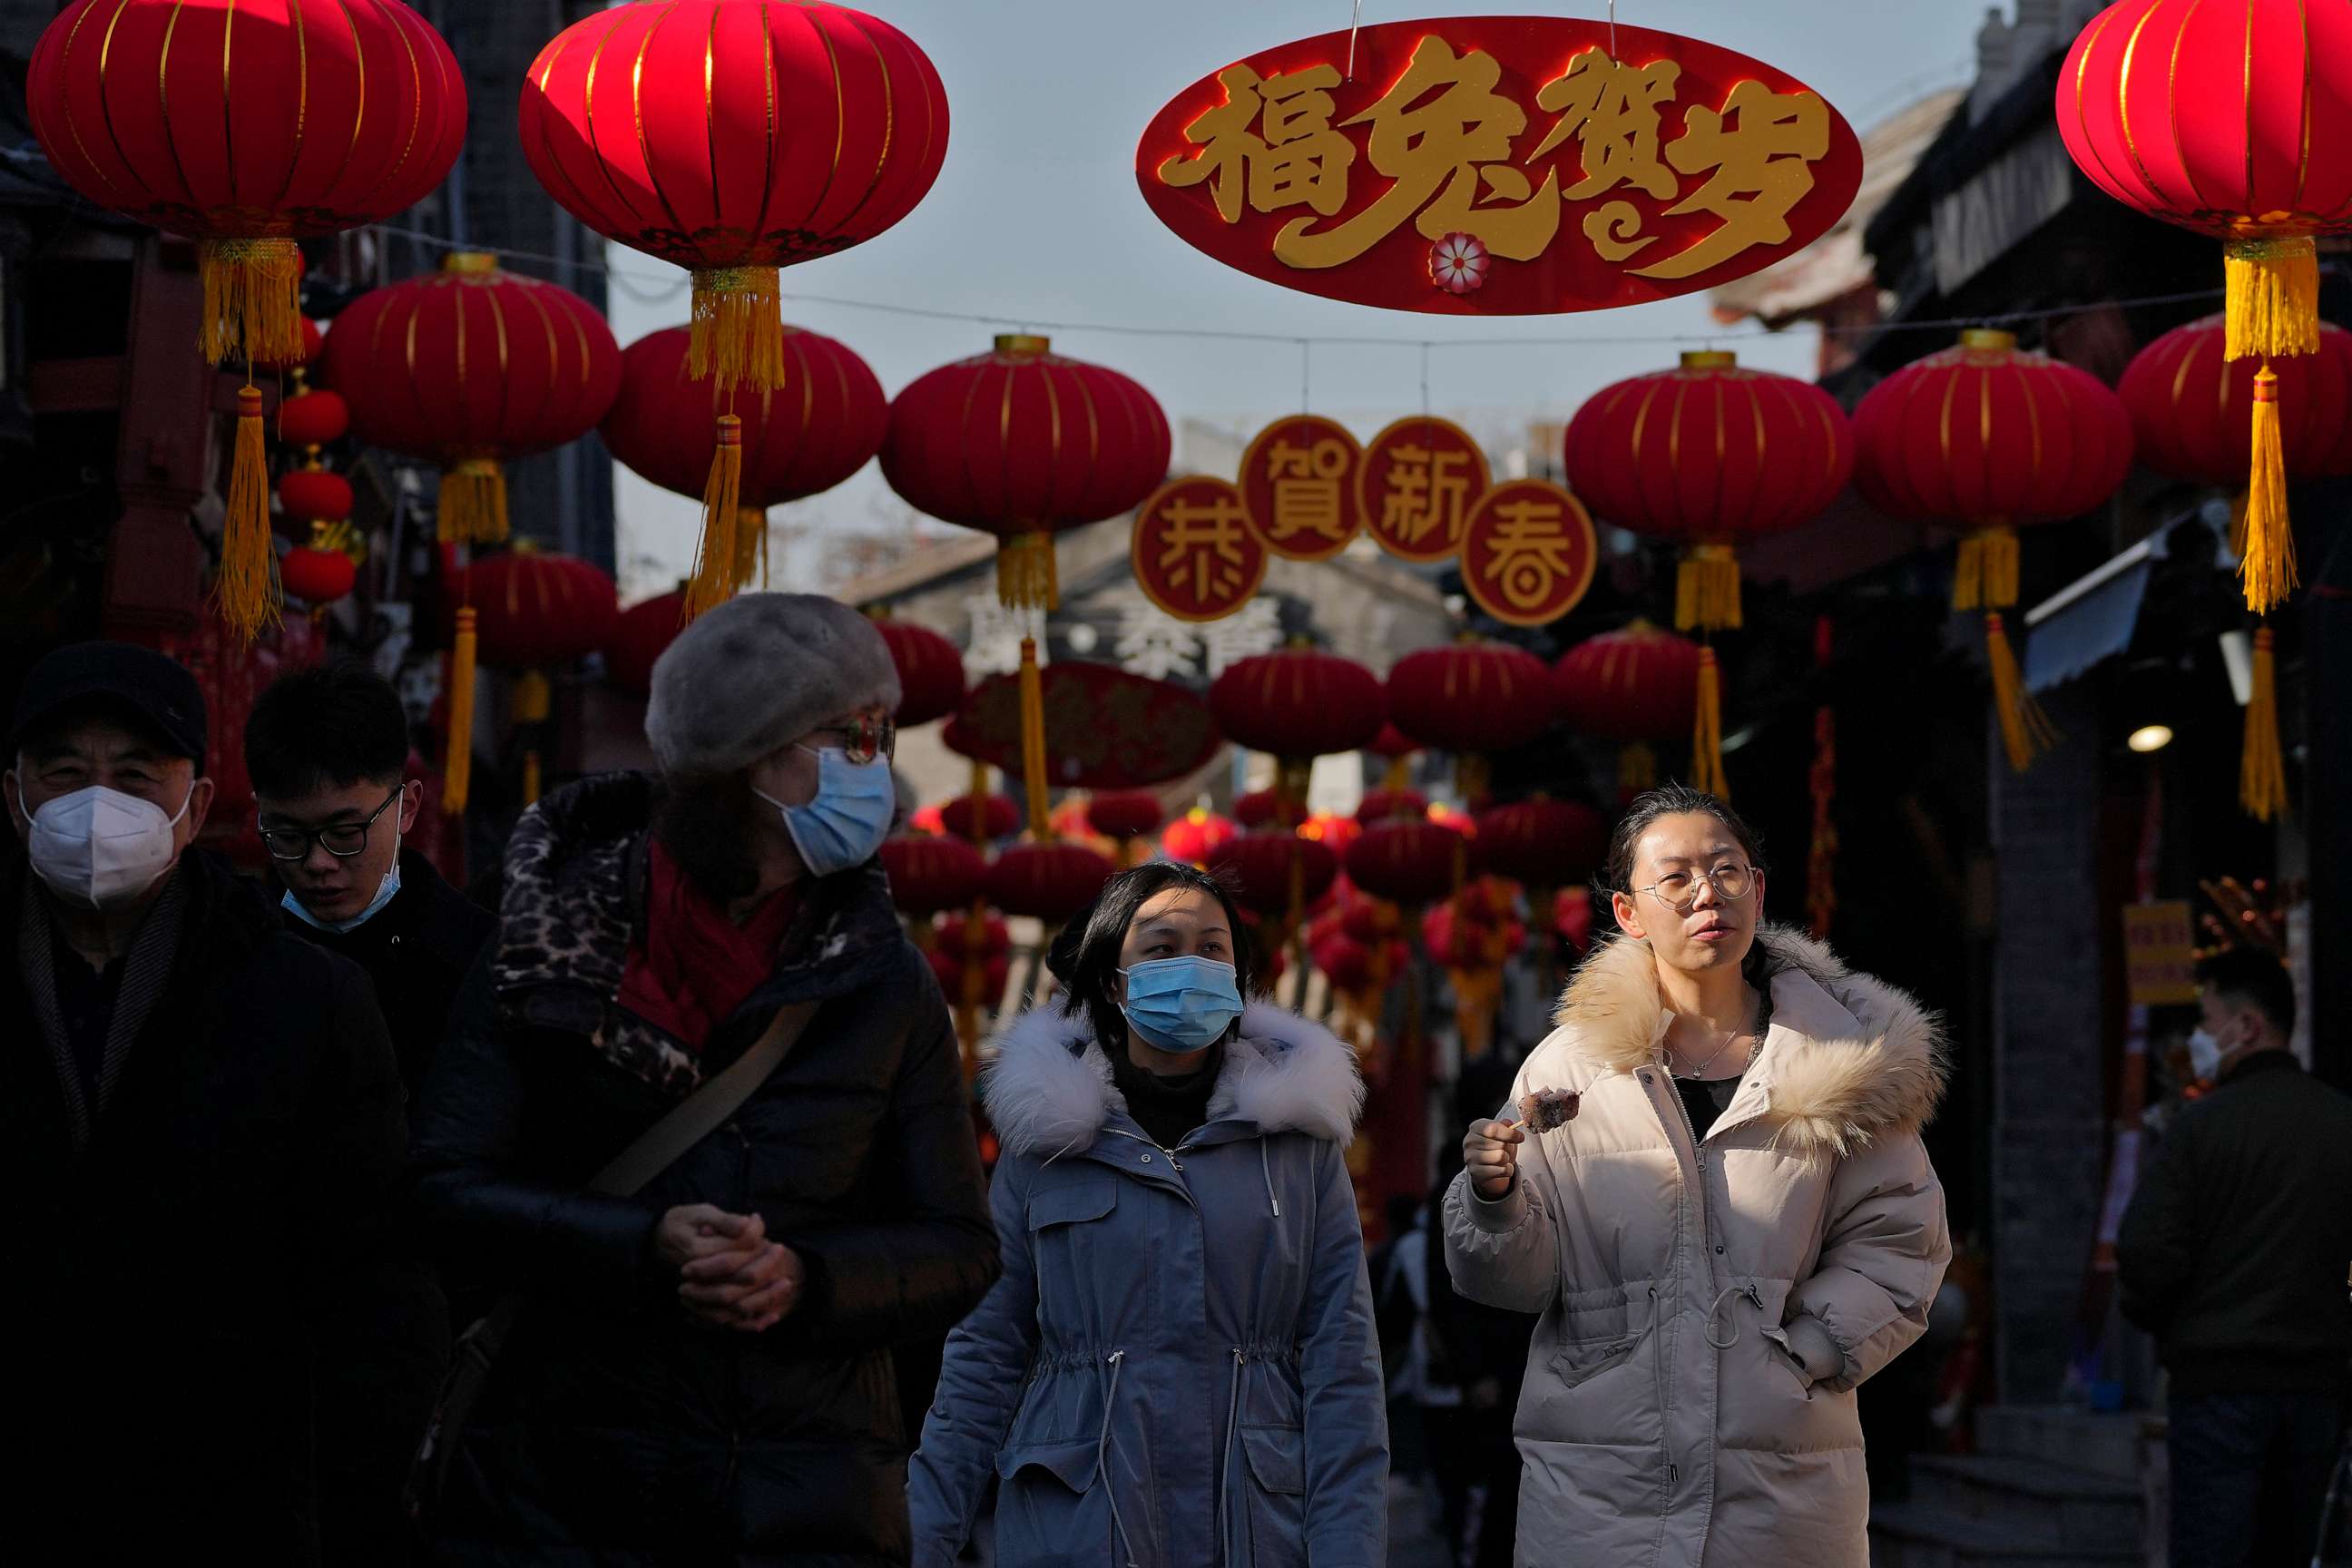 PHOTO: Visitors tour a shopping alley near the Houhai Lake displaying lanterns and Lunar New Year decorations in Beijing, Chin, Jan. 16, 2023.